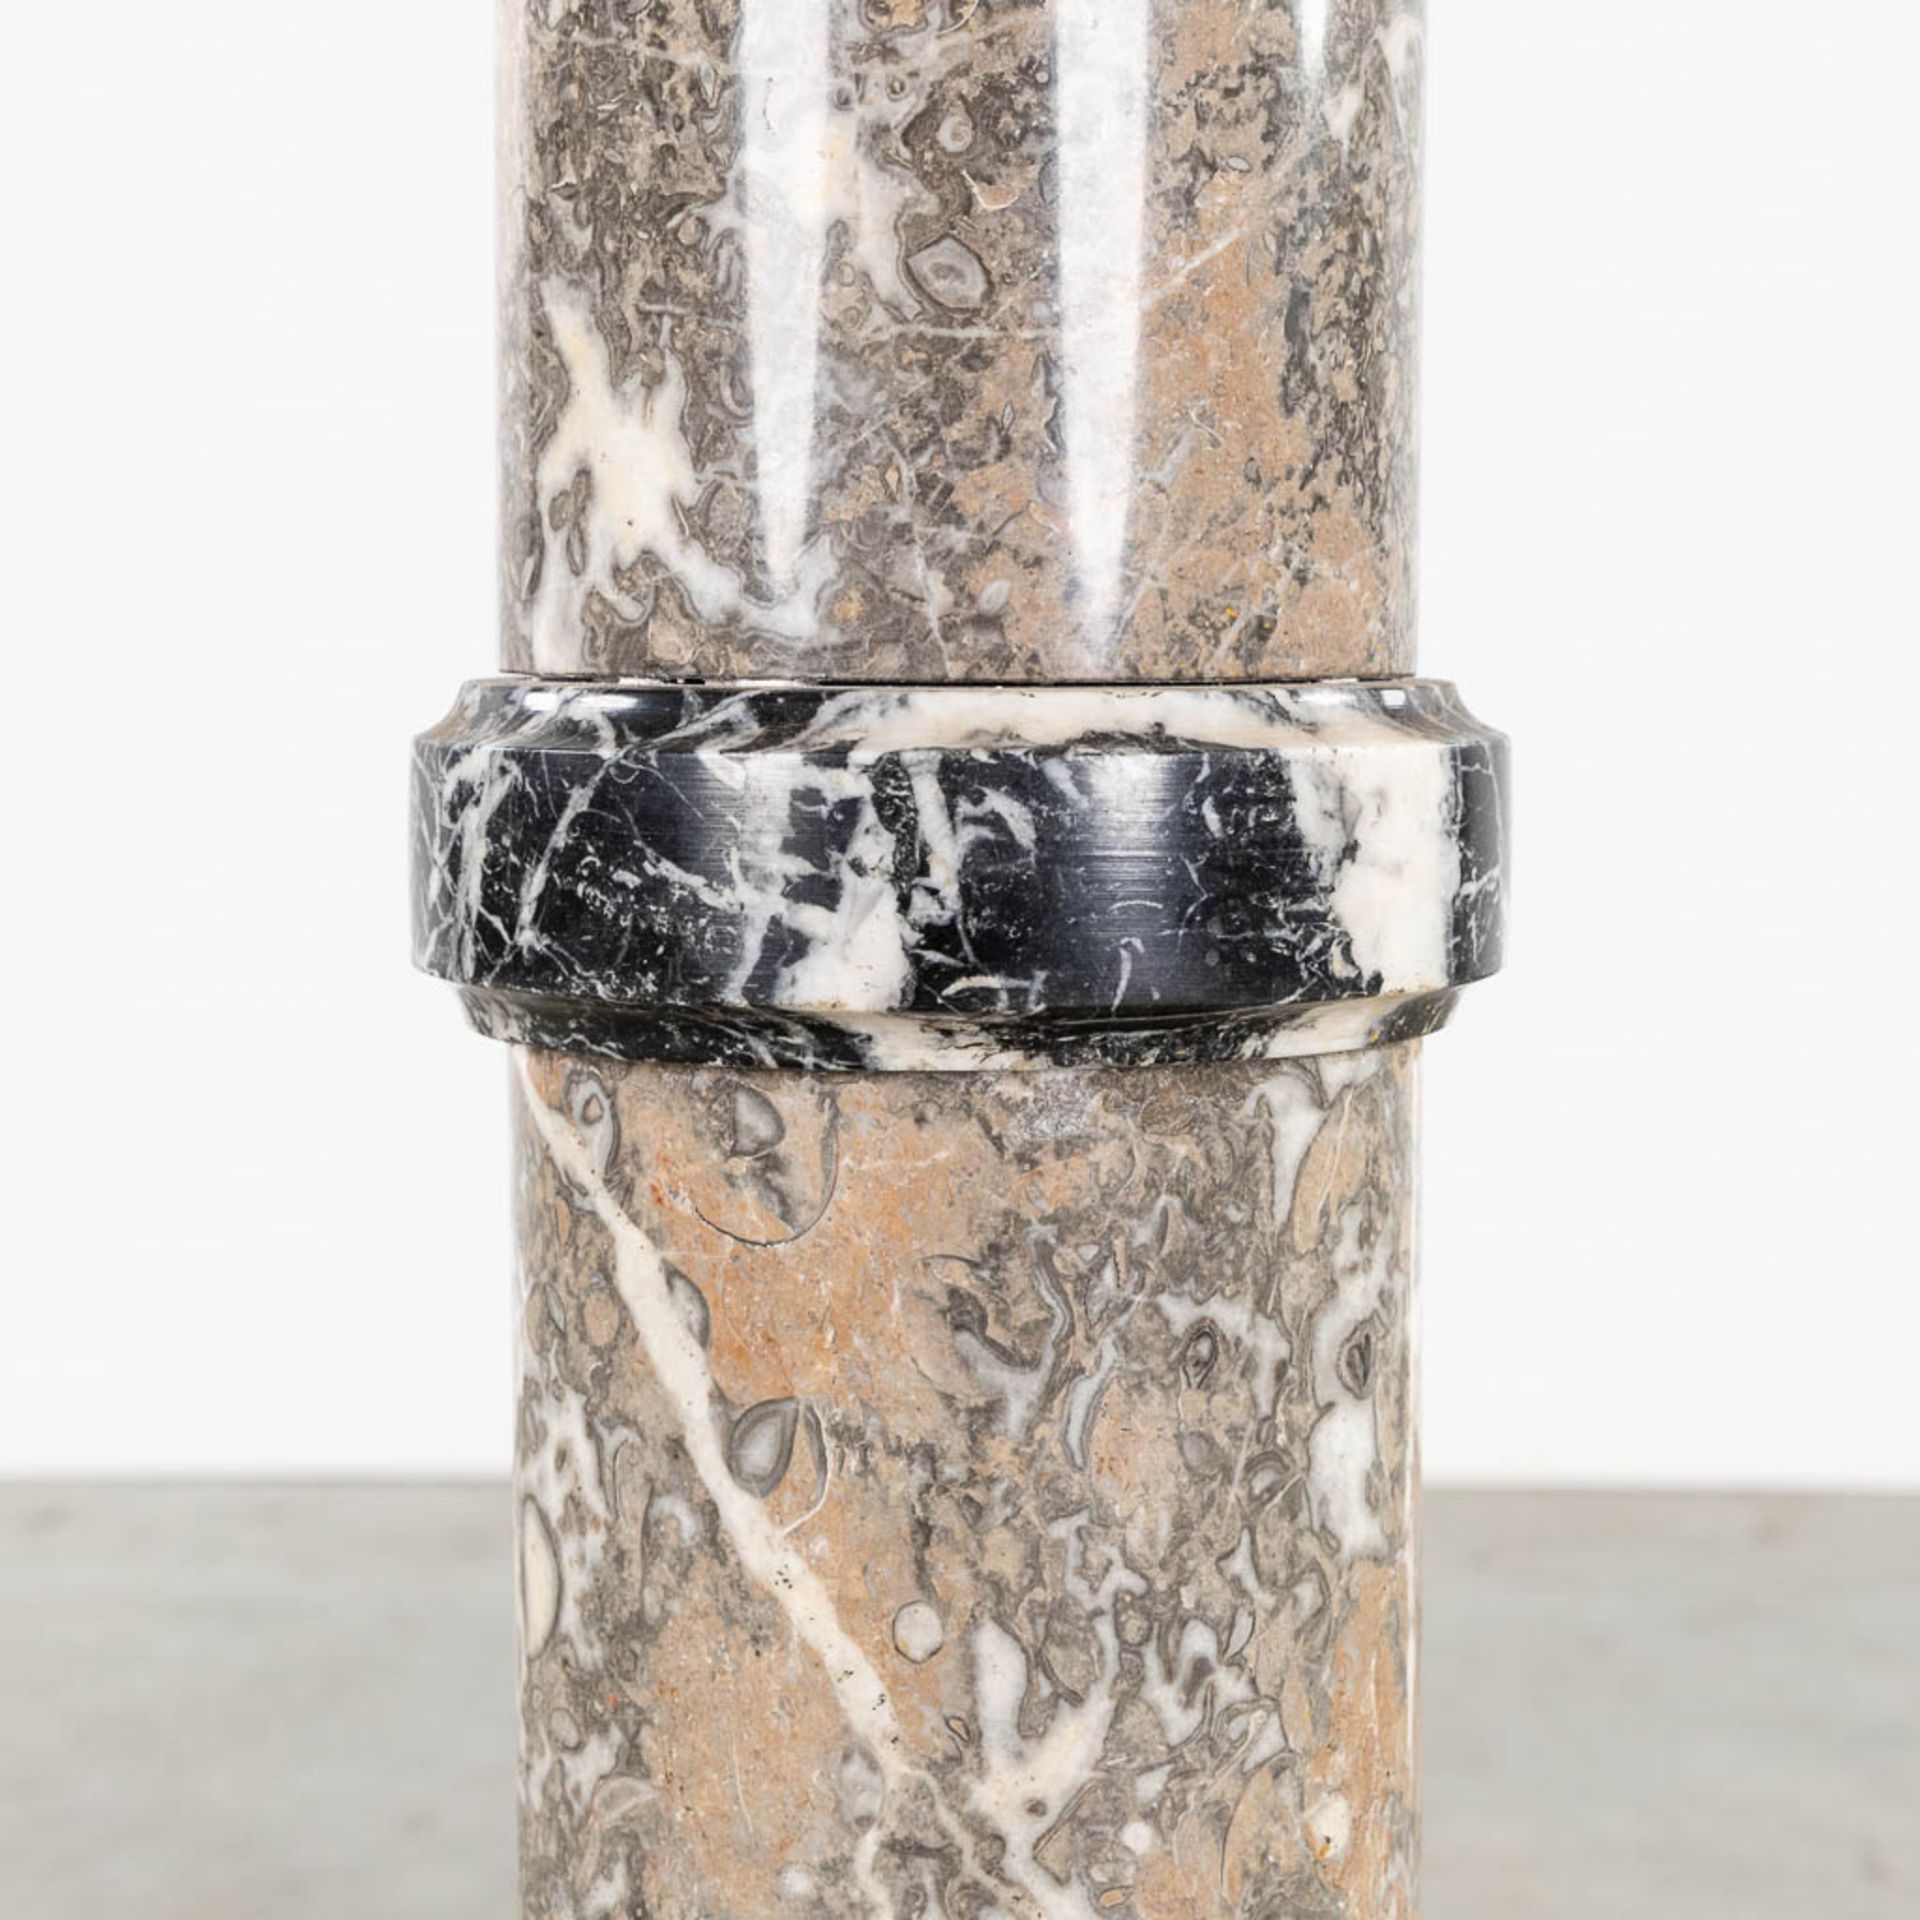 An antique pedestal, black, grey and brown marble. Circa 1900. (L:27 x W:27 x H:115 cm) - Image 5 of 9